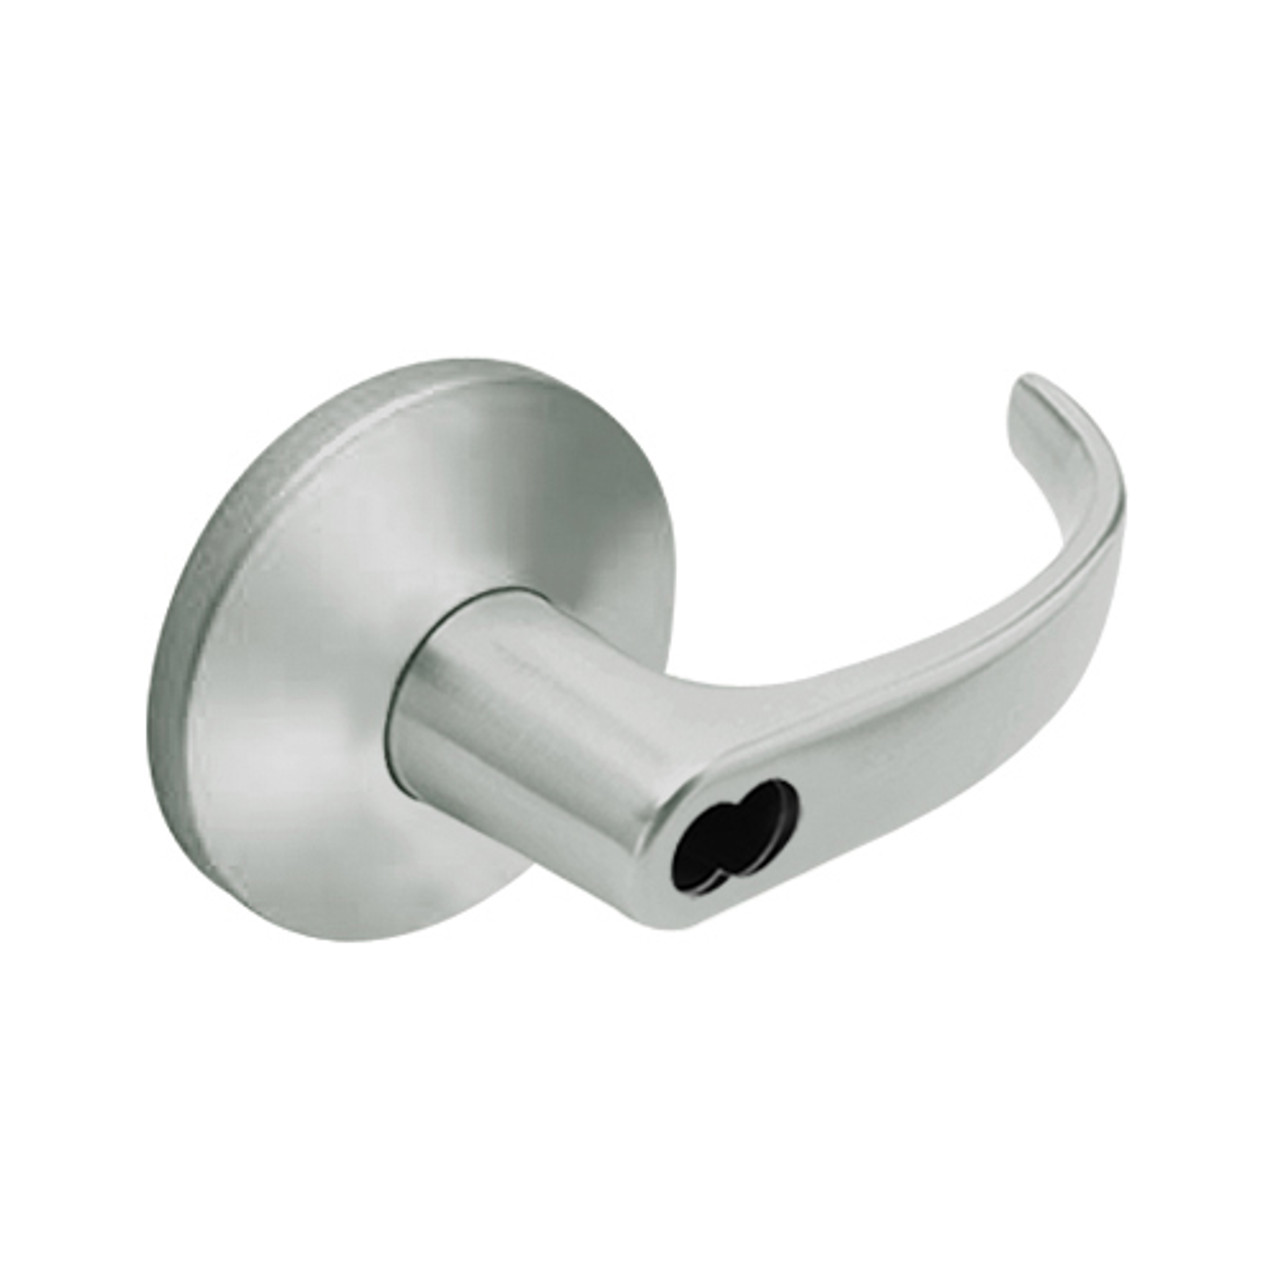 9K57EA14LSTK619 Best 9K Series Entrance or Office Cylindrical Lever Locks with Curved with Return Lever Design Accept 7 Pin Best Core in Satin Nickel